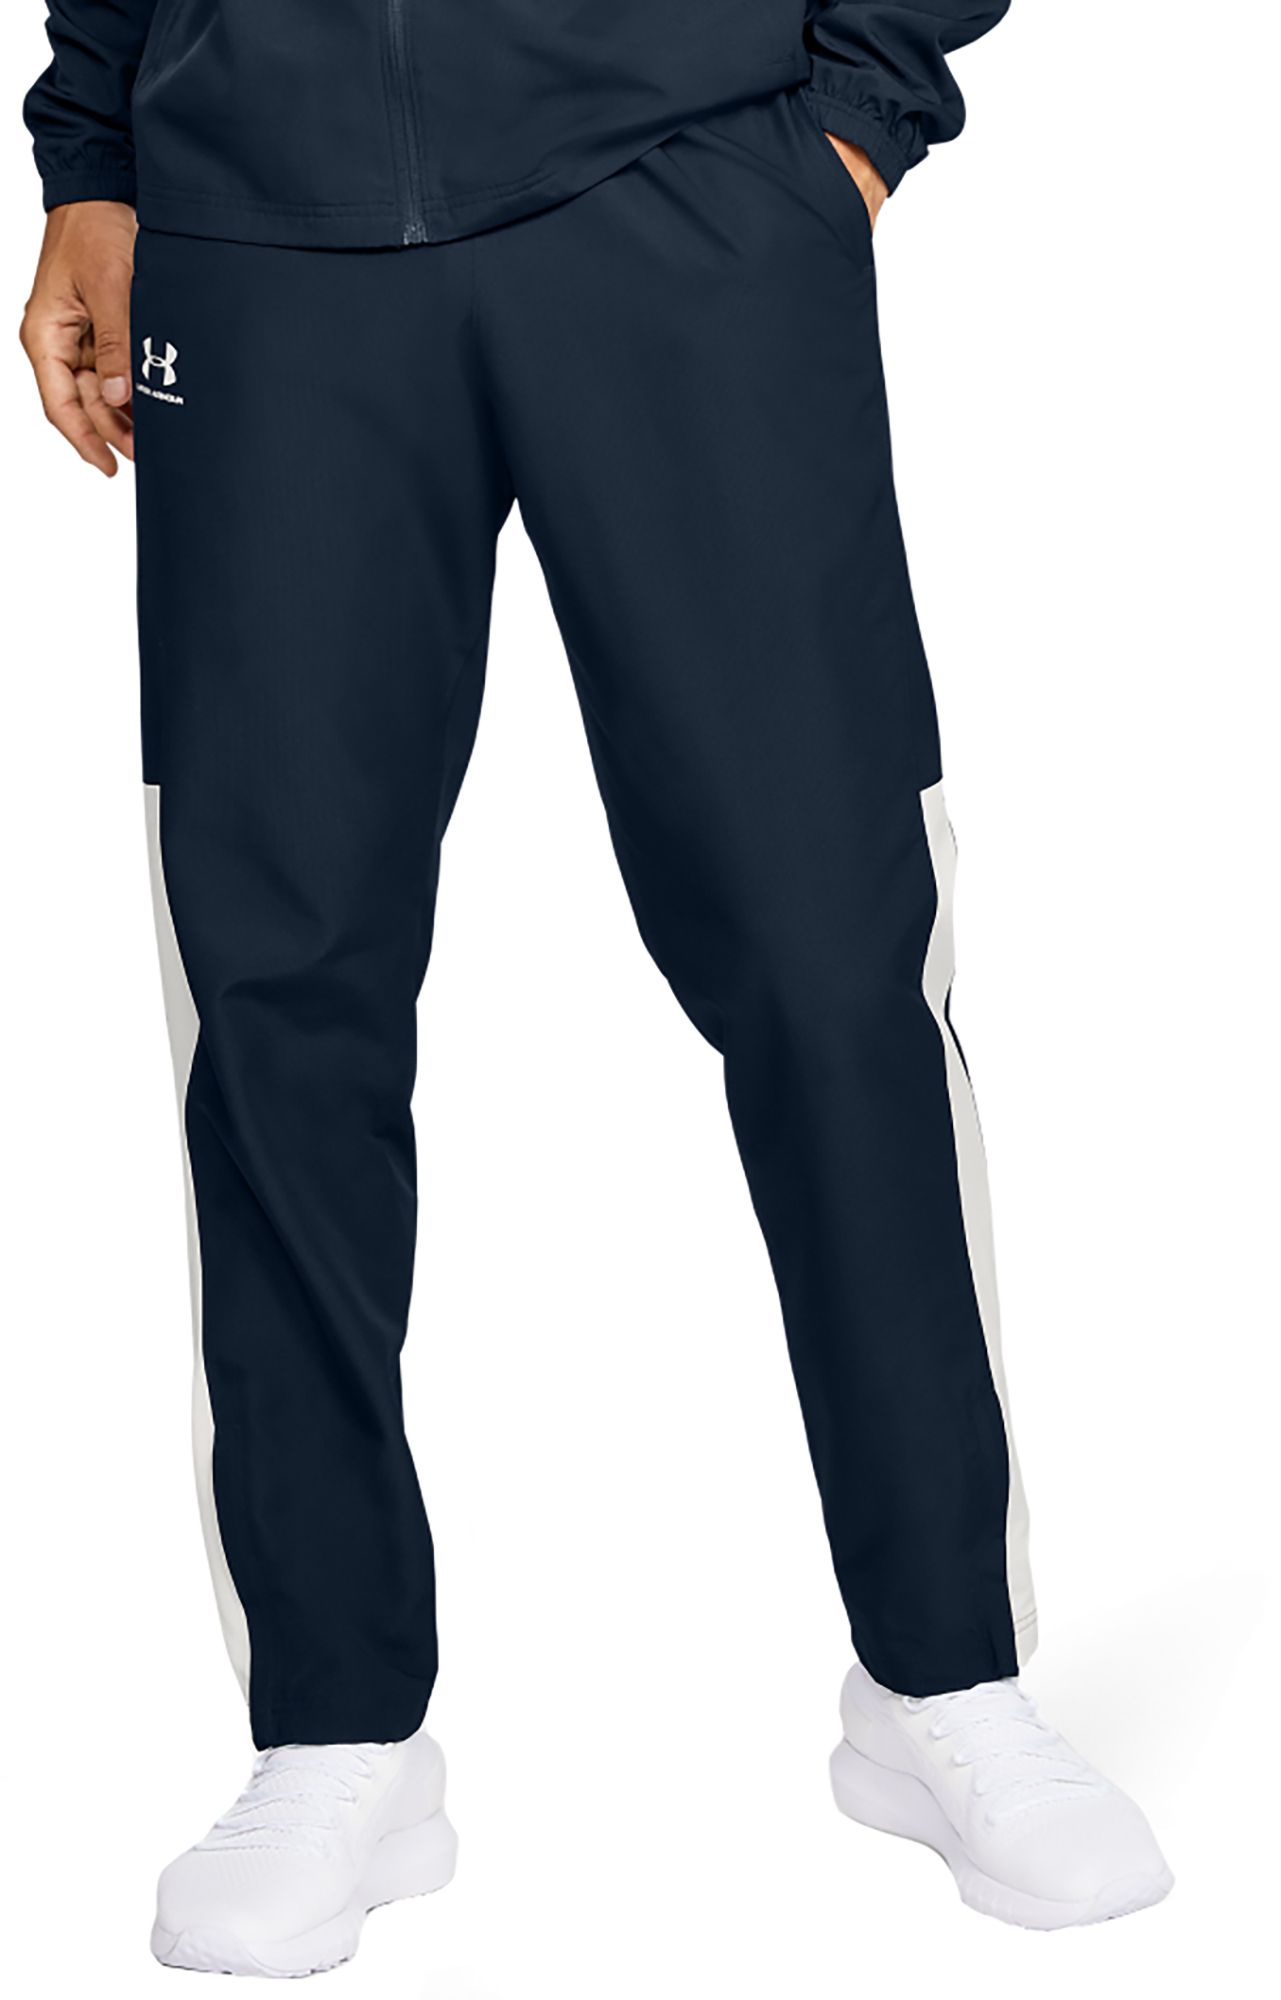 Under Armor Training Pants Factory Sale, 59% OFF | www 